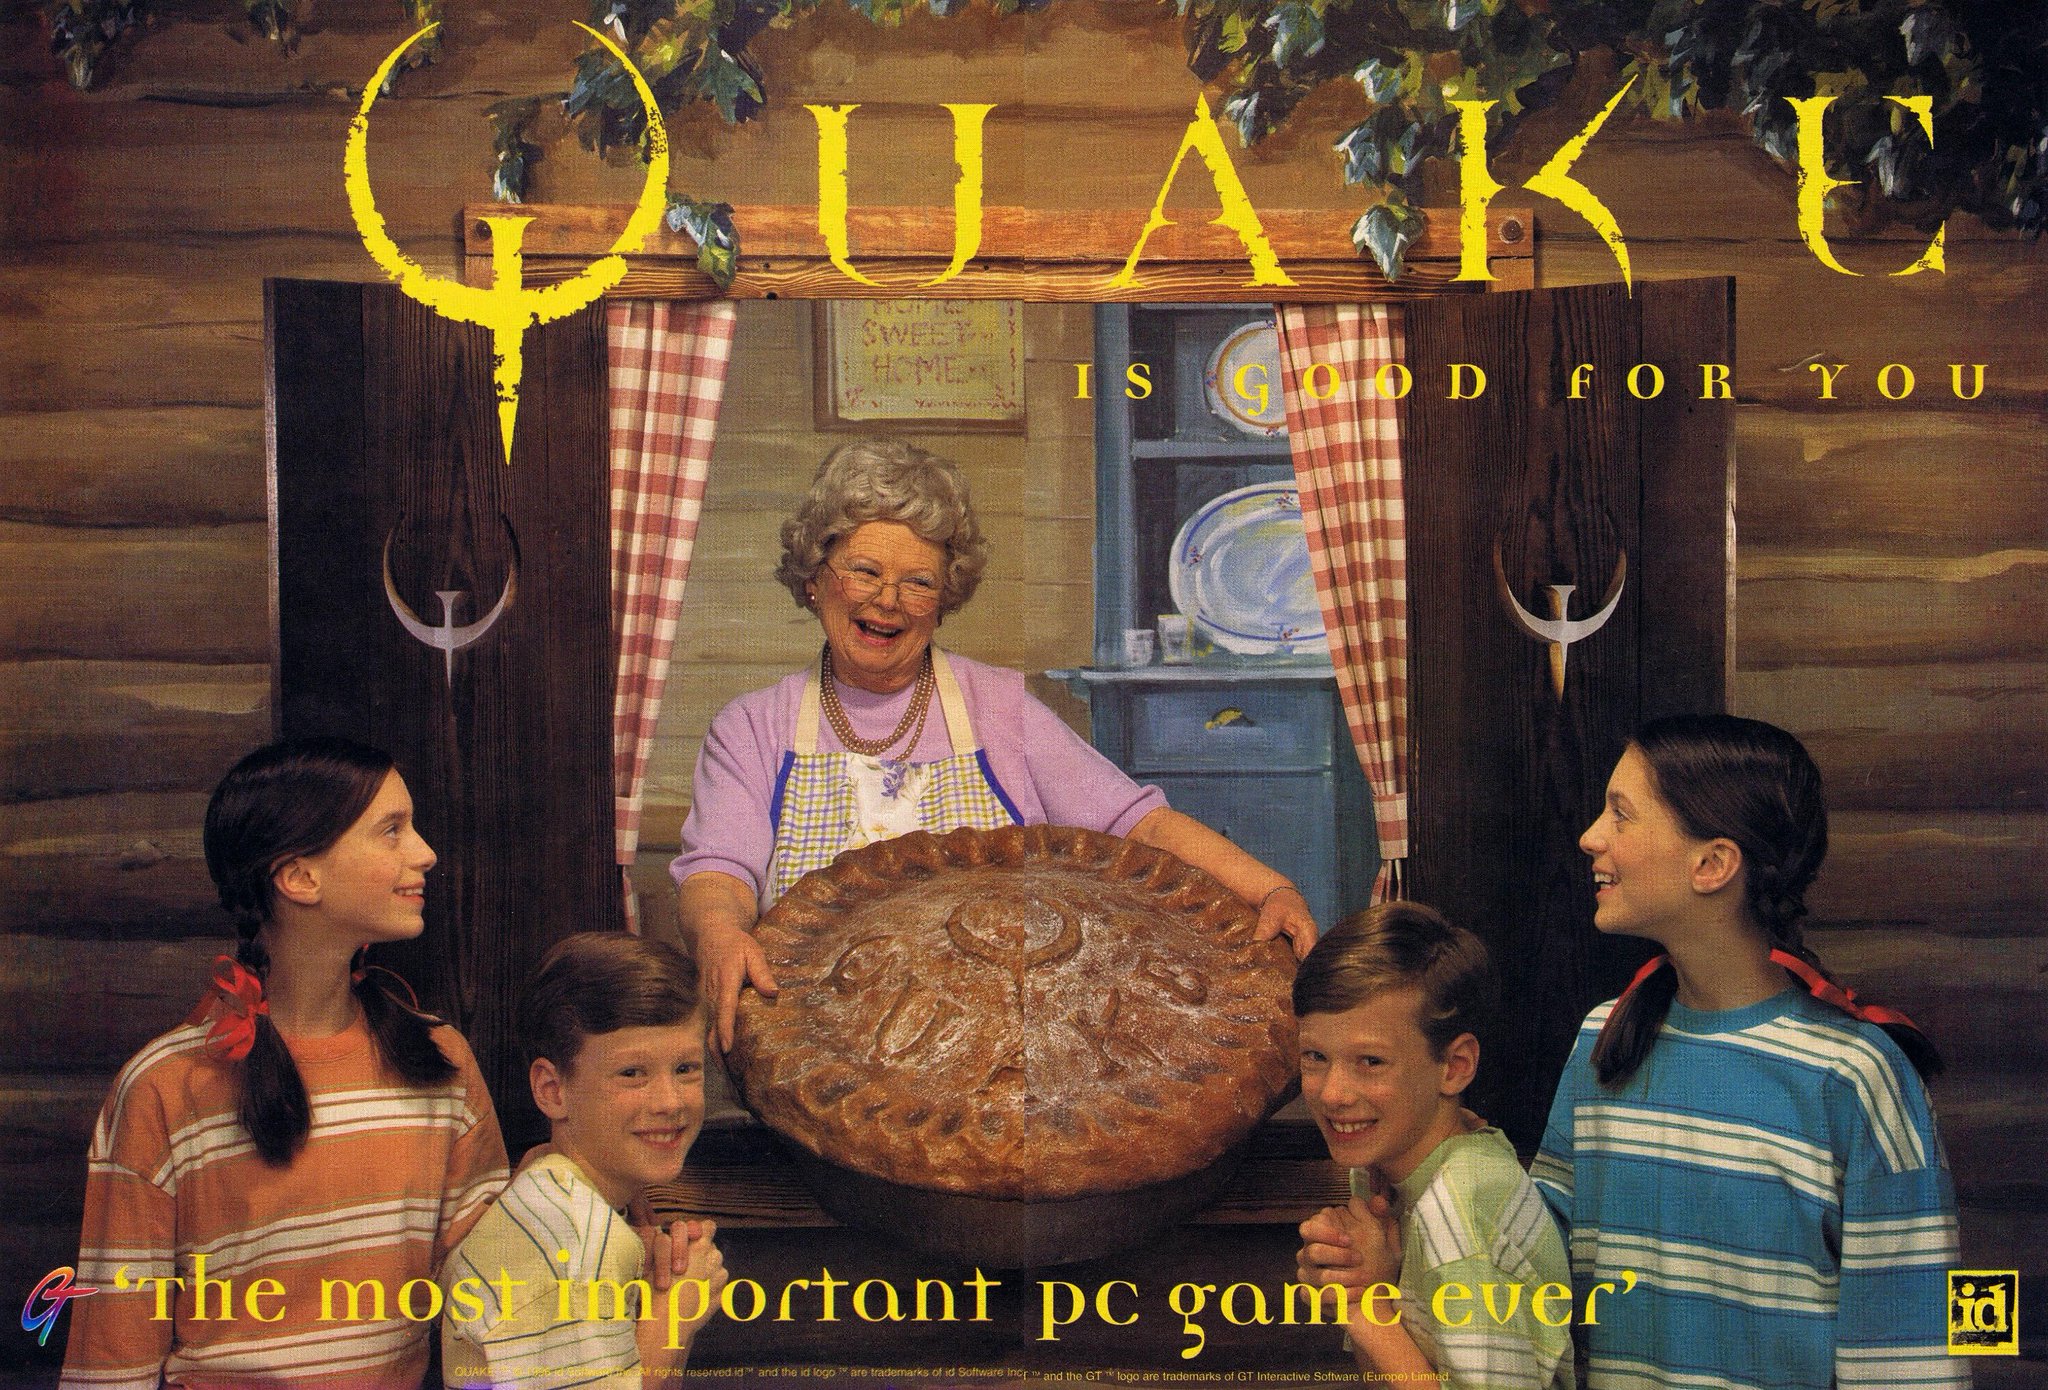 quake_is_good_for_you_ad.jpg